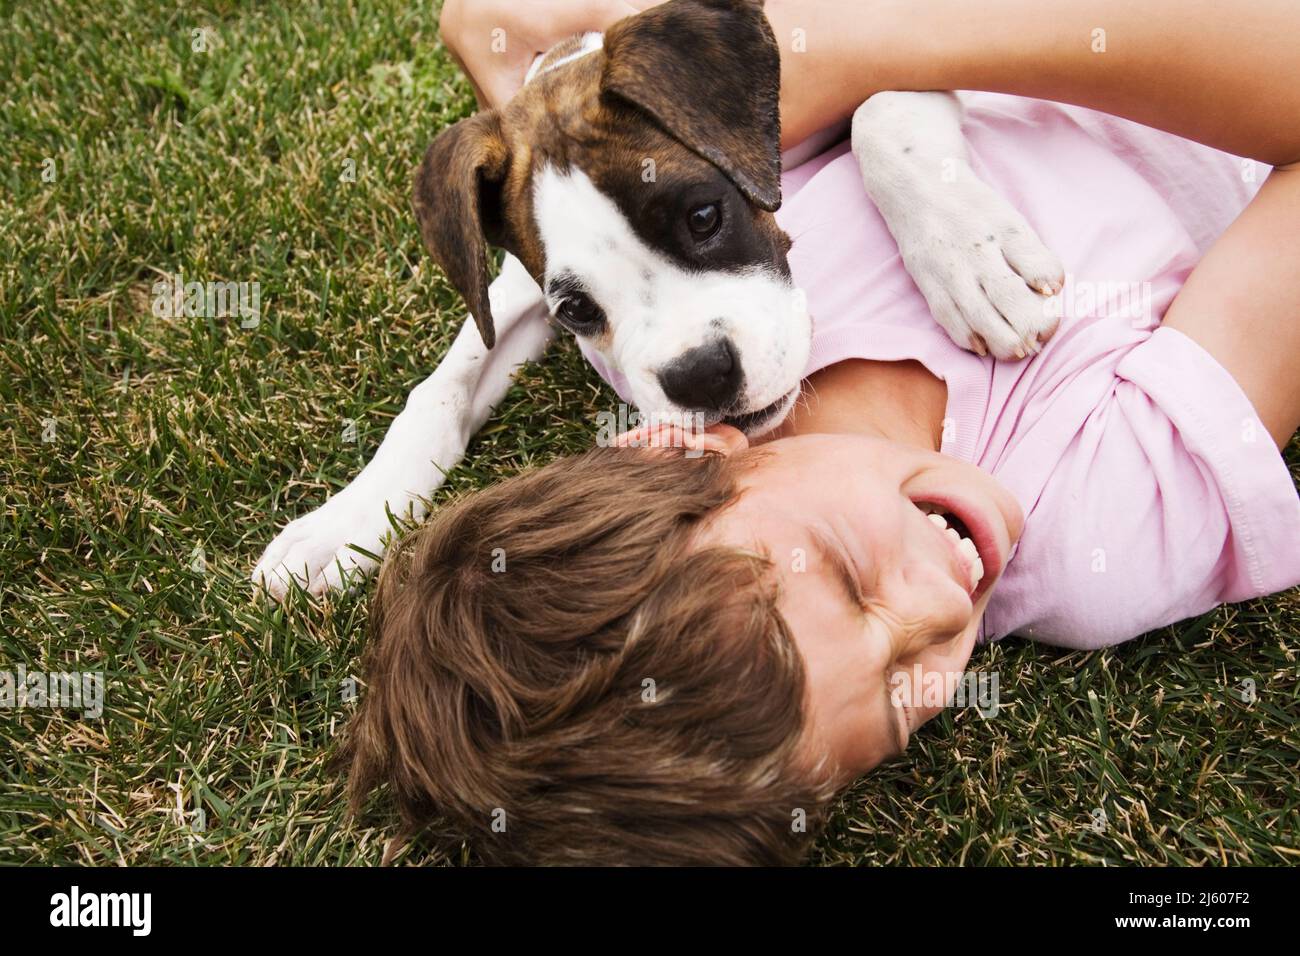 Young boy with Boxer dog puppy. Stock Photo